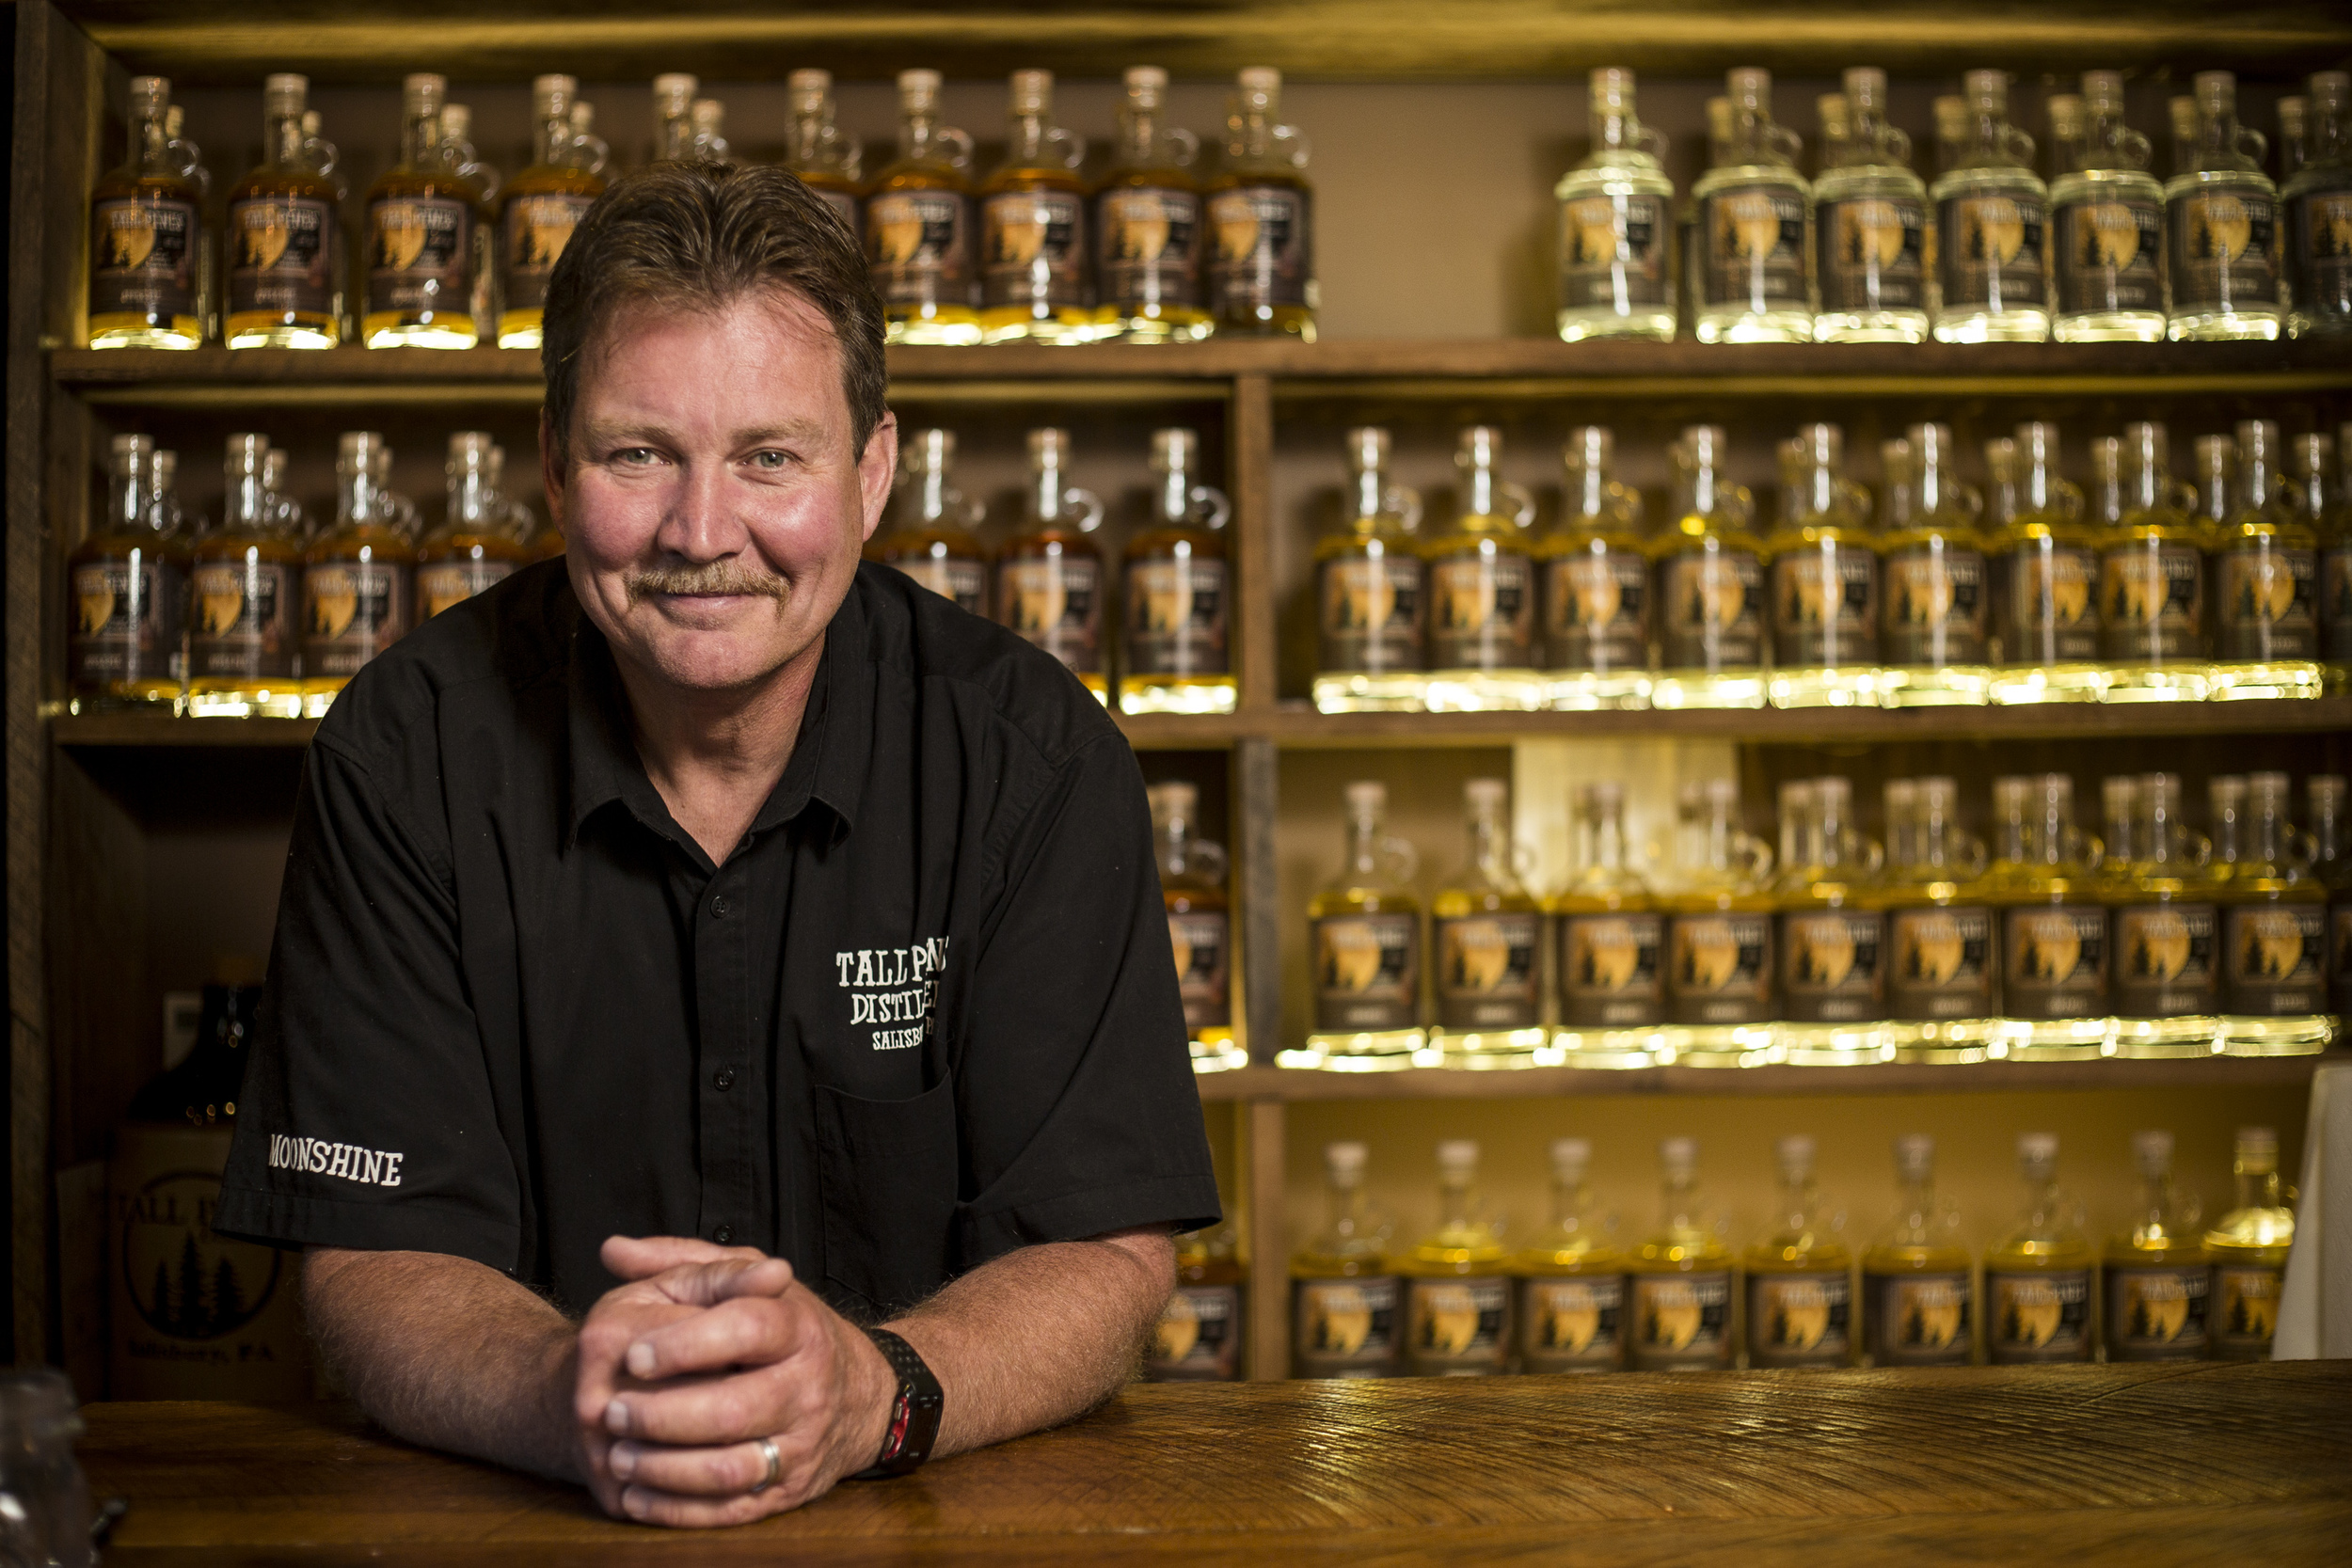  Tall Pines Distillery co-owner Keith Welch stands for a portrait in front of some of the distillery's moonshine in Salisbury, Somerset County, on Monday, July 11, 2016. The distillery claims to be the first legal moonshine distillery in Somerset Cou